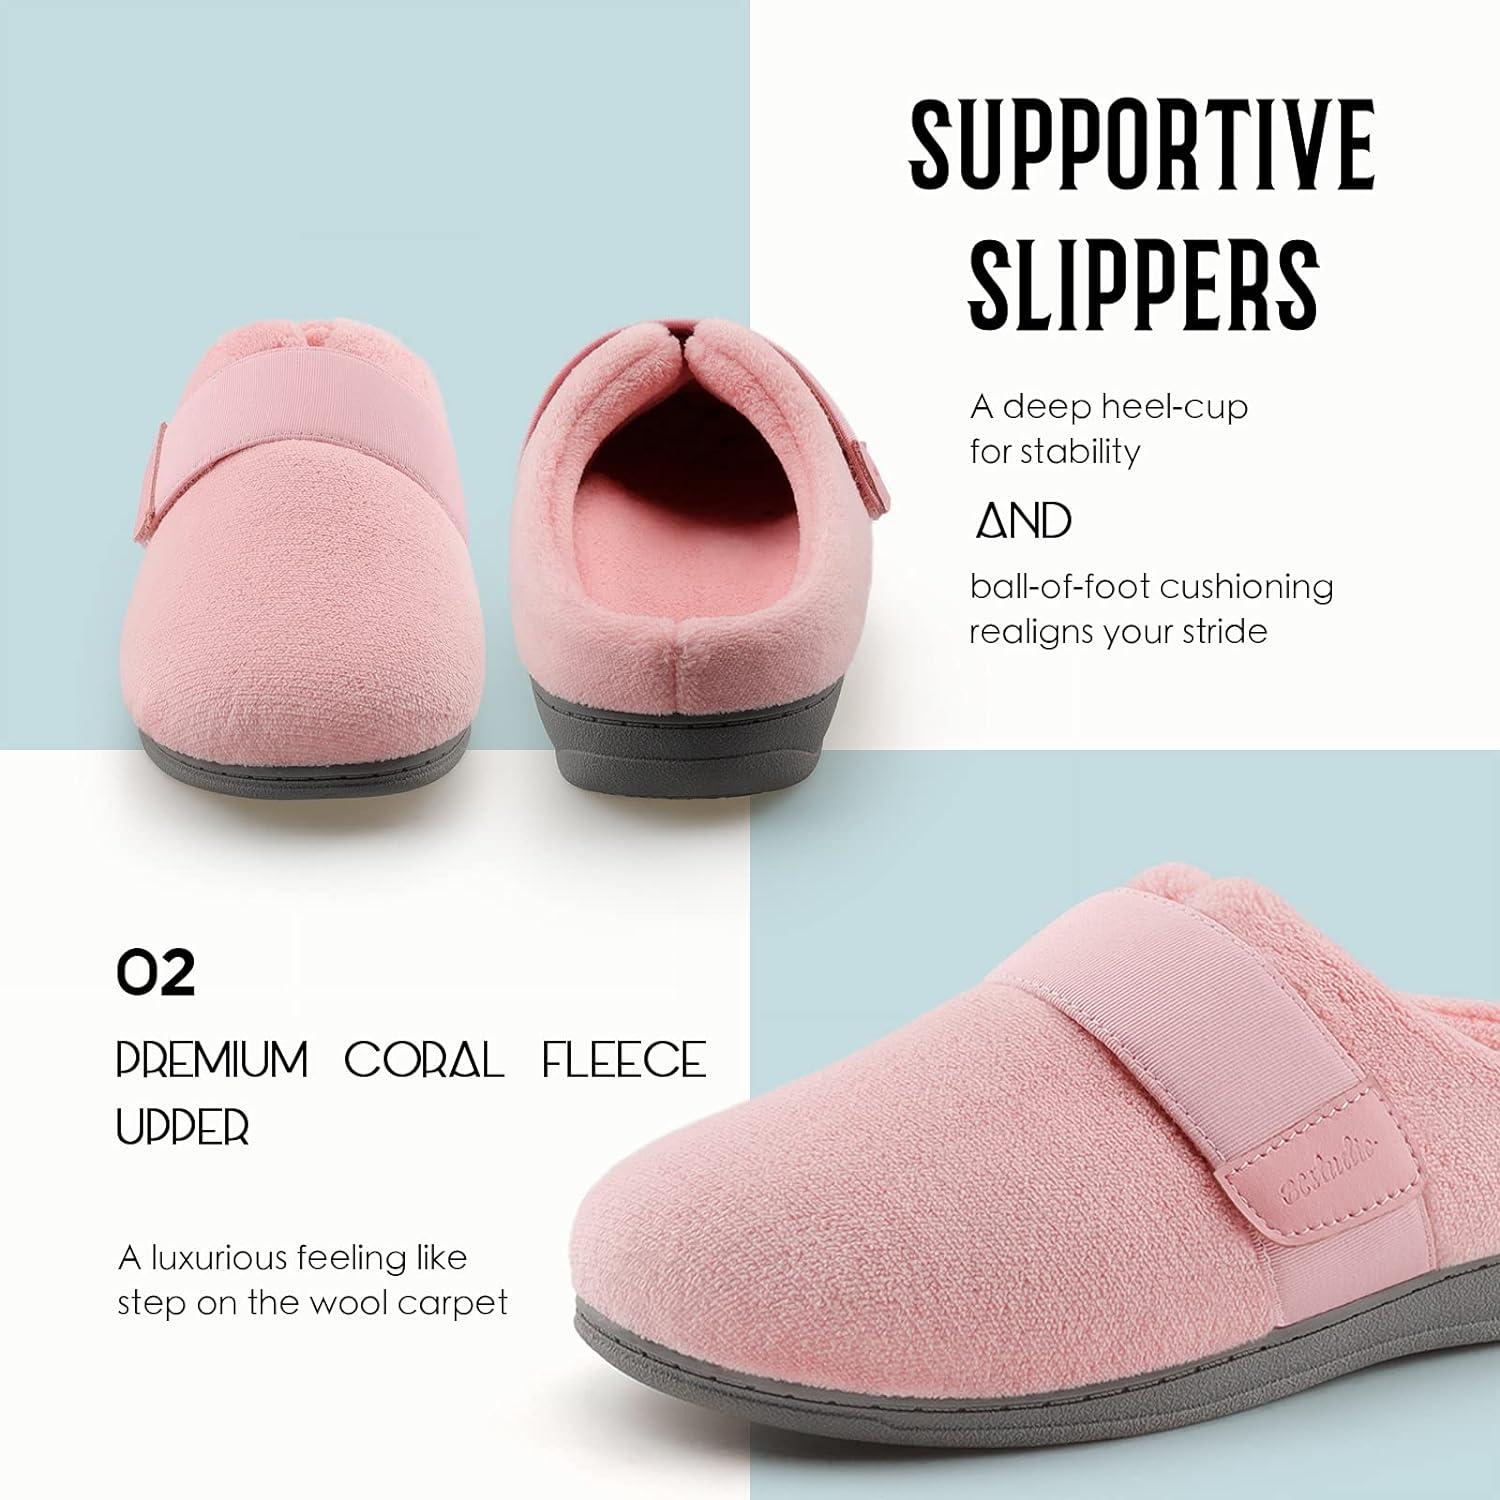 The Ultimate List of Cozy Slippers to Help With Foot Pain